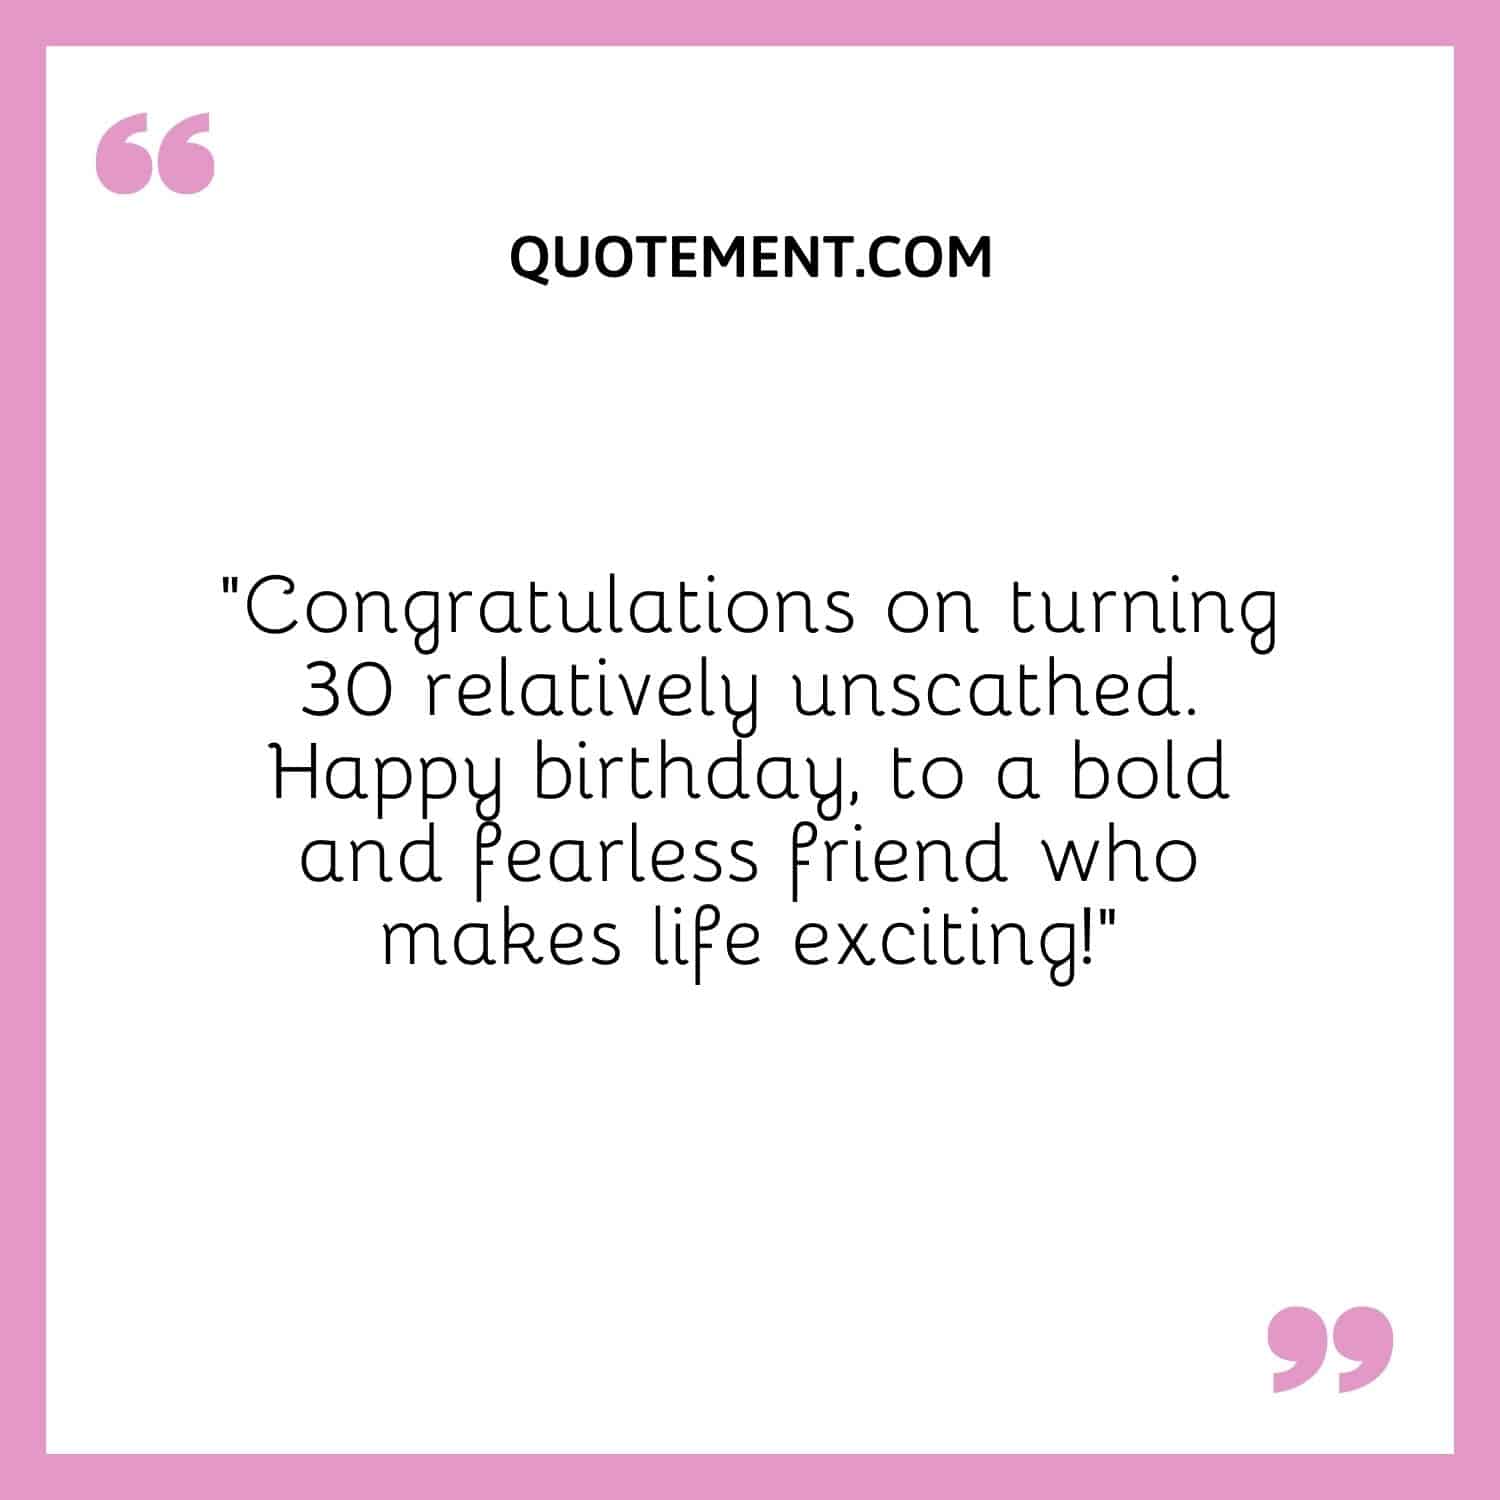 “Congratulations on turning 30 relatively unscathed. Happy birthday, to a bold and fearless friend who makes life exciting!”